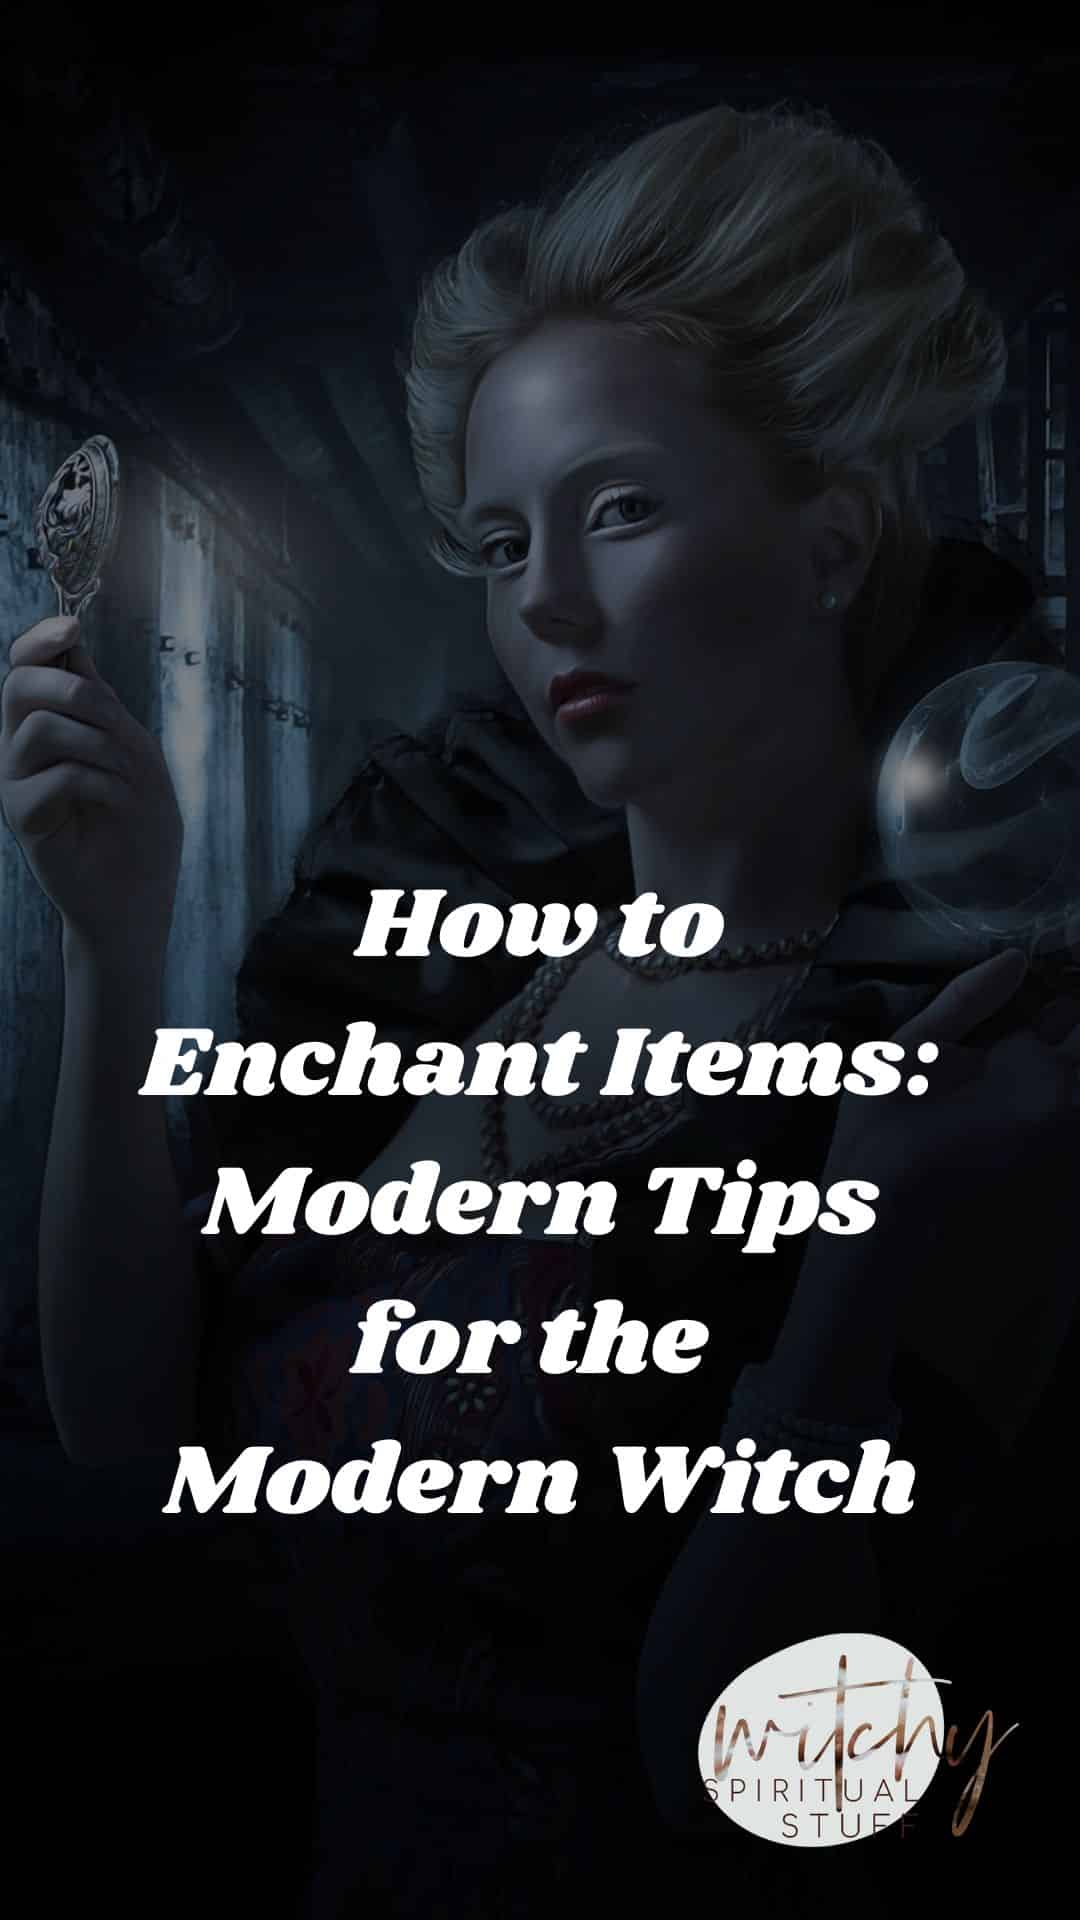 How to Enchant Items: Modern Tips for the Modern Witch